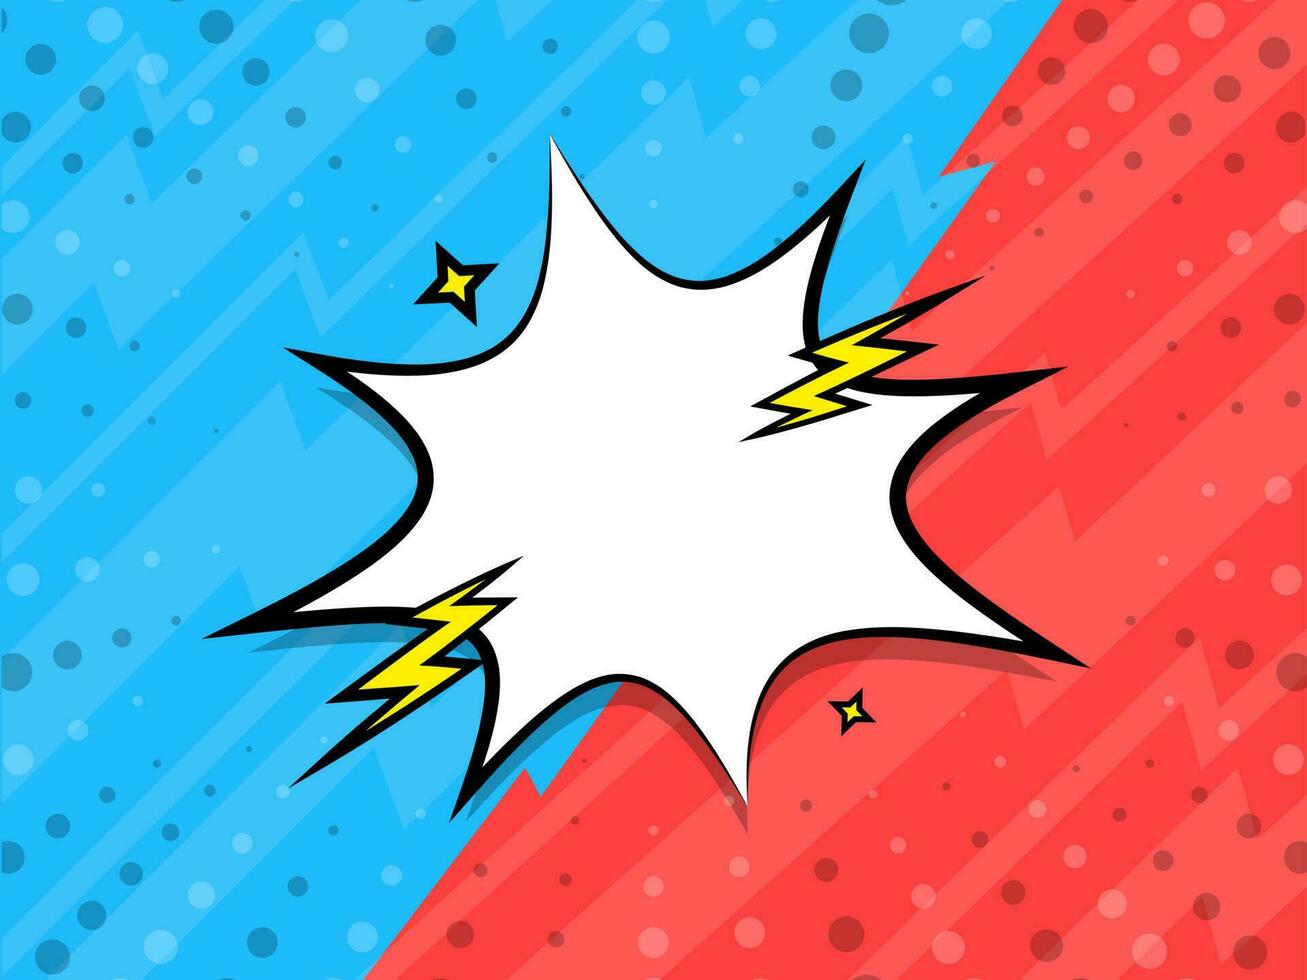 Blank Starburst Frame With Lightning Bolts On Blue And Red Dotted Background. vector